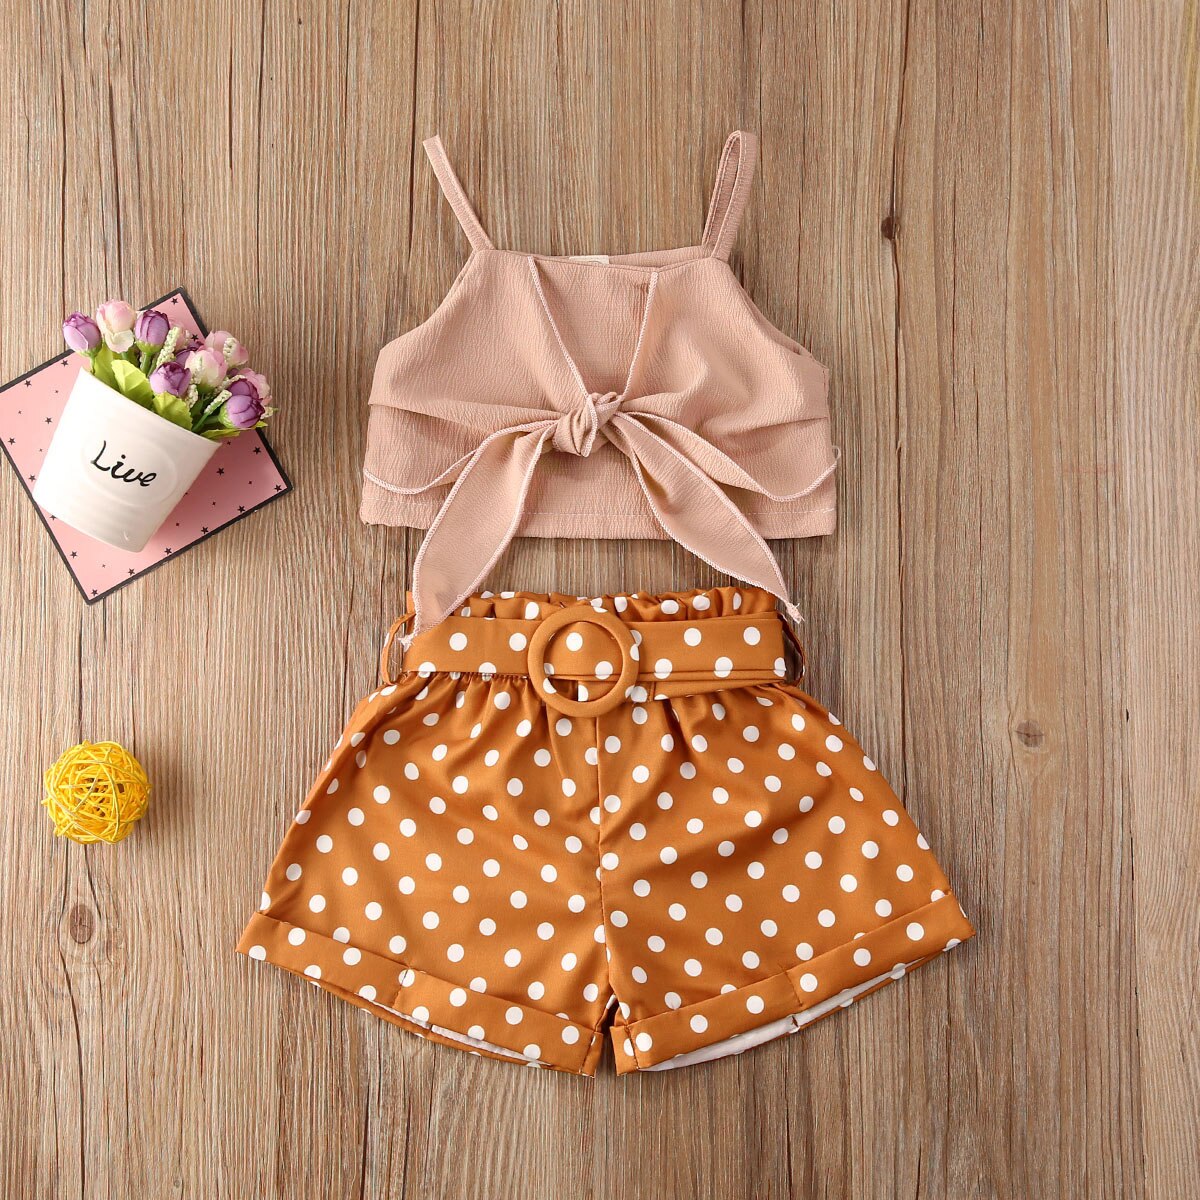 Emmababy Kleinkind Baby Mädchen Kleidung Sommer Einfarbig Band Bowknot Crop Tops Polka Dot Kurze Hosen 2Pcs Outfits Kleidung 1-6Y: skin colour / 3T